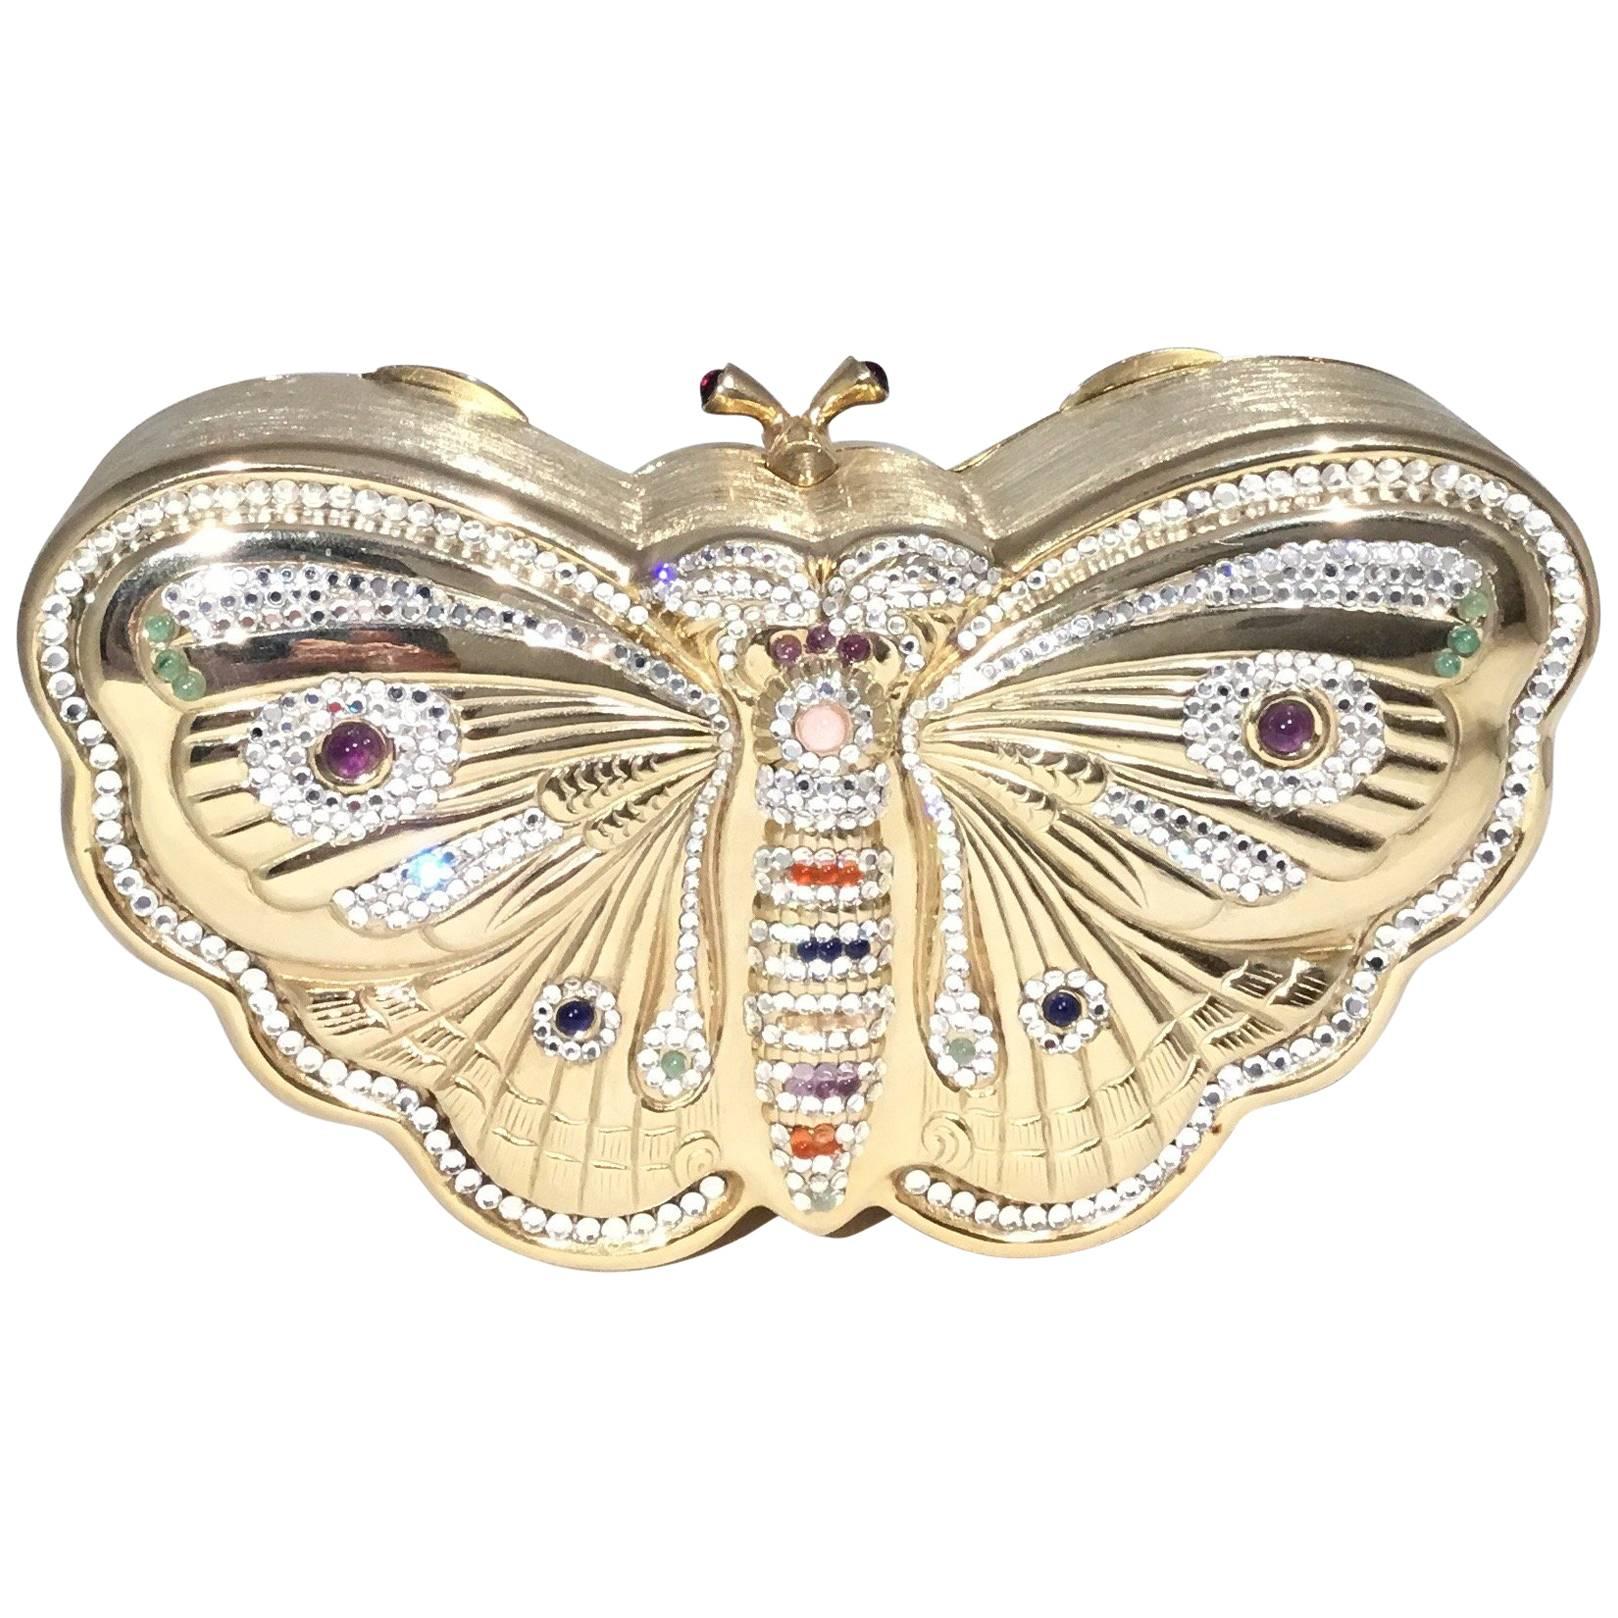 Judith Leiber Couture Monarch Butterfly Crystal Clutch Bag | Neiman Marcus